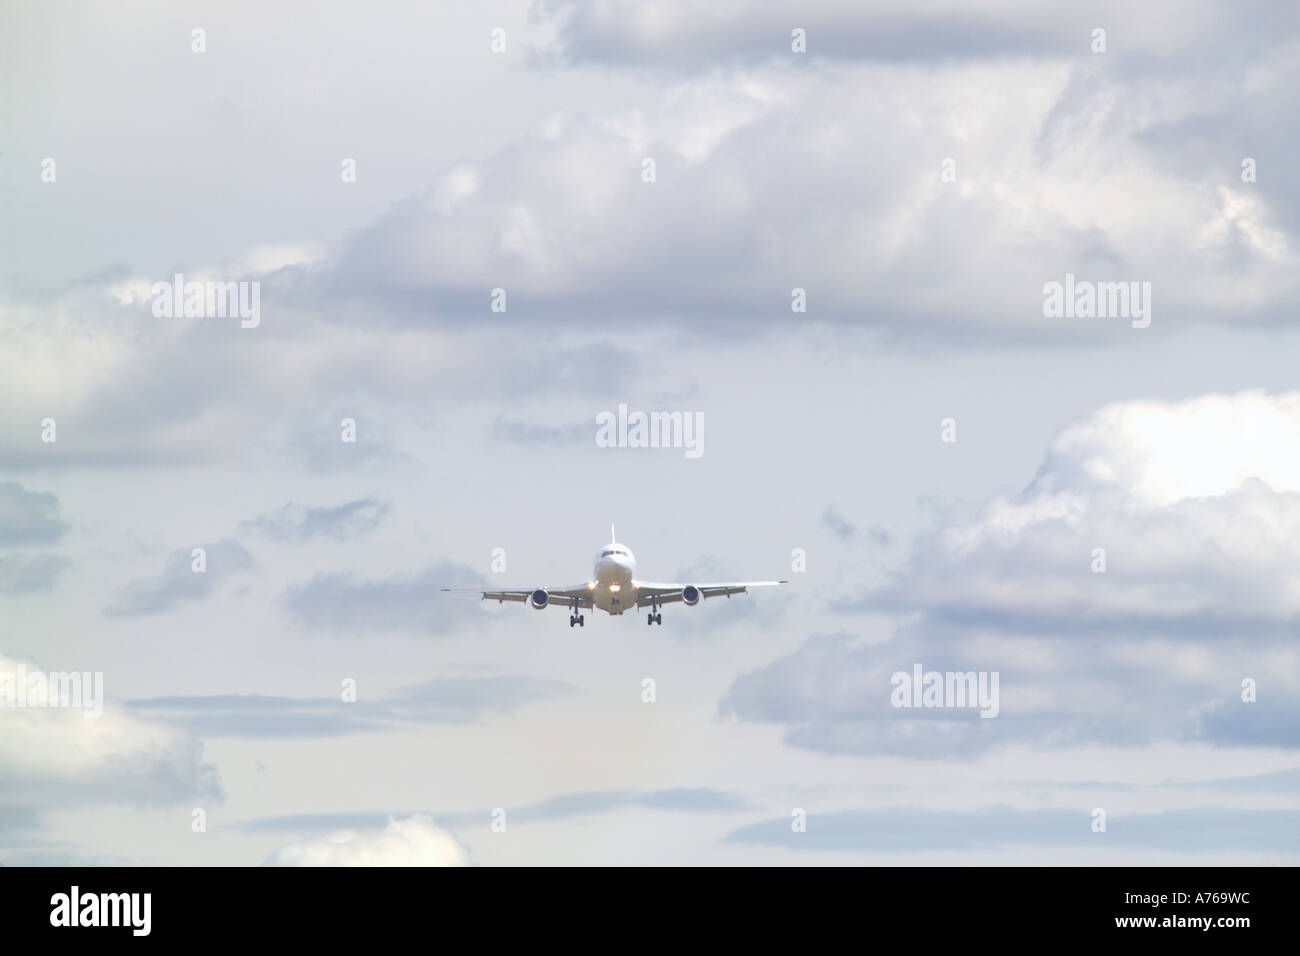 A passenger jet aircraft coming in to land viewed from the front with a cloudy sky. Stock Photo